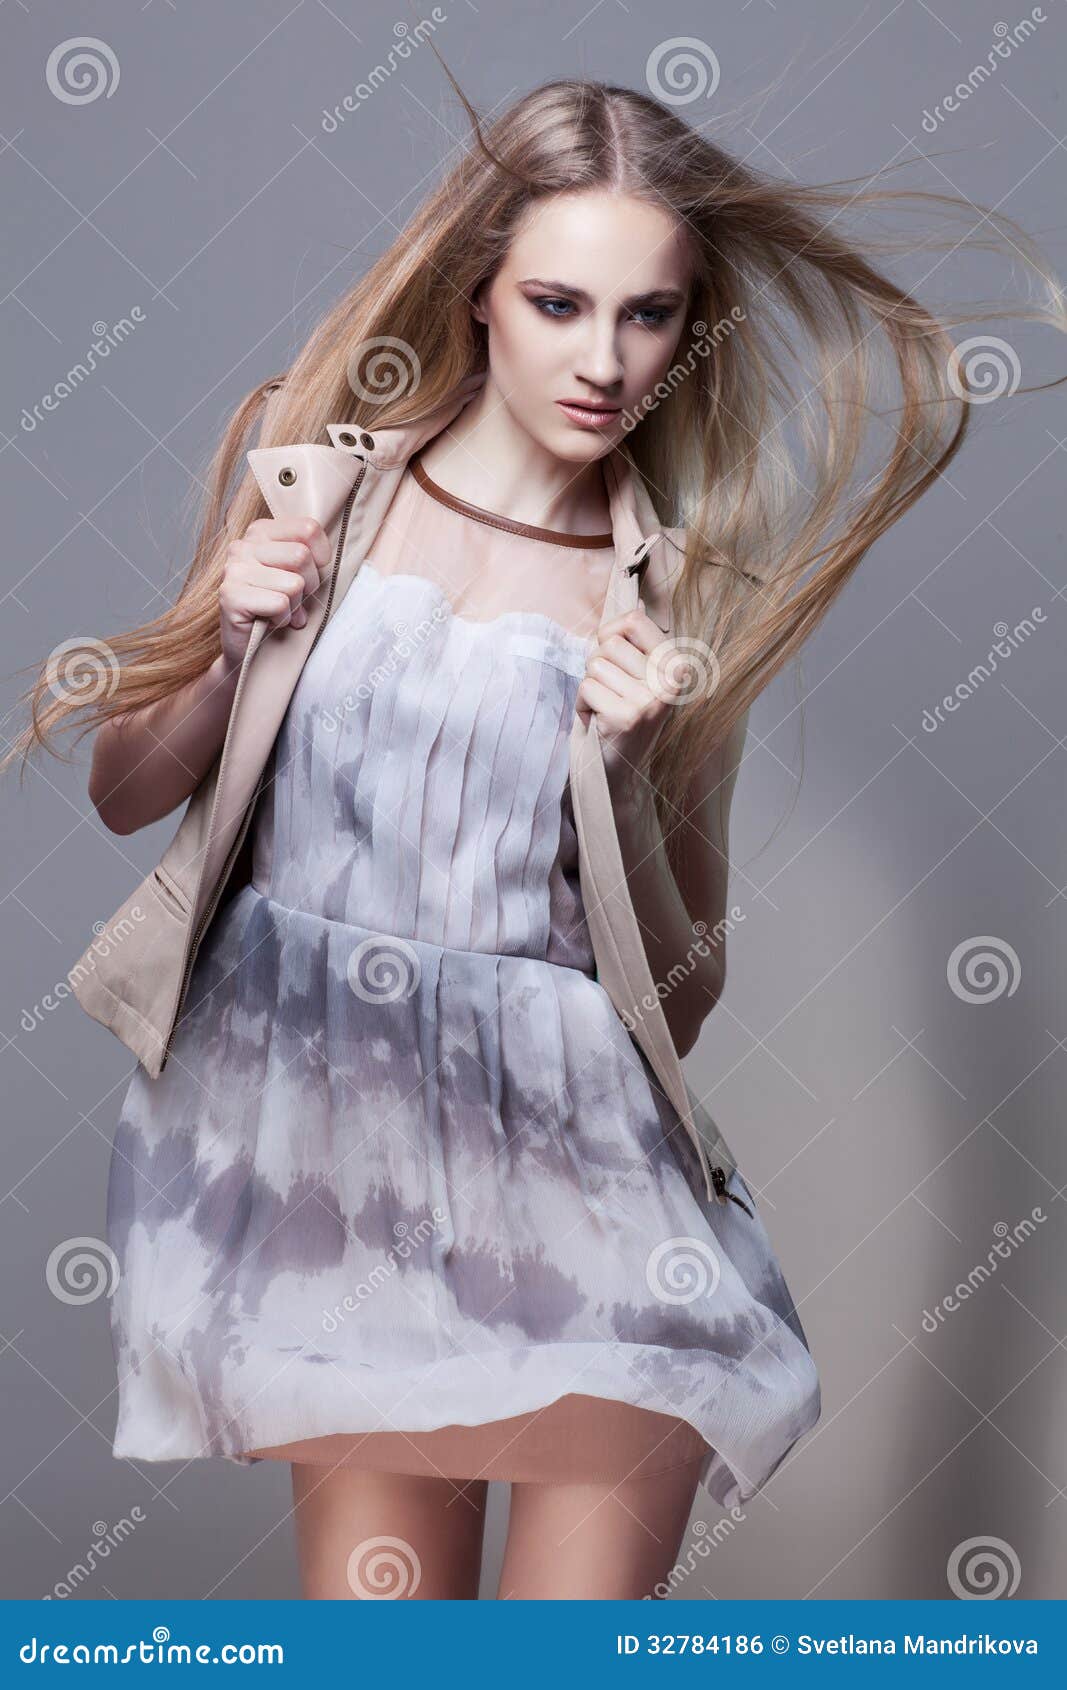 ... girl with flying hair in fashionable short dress and waistcoat